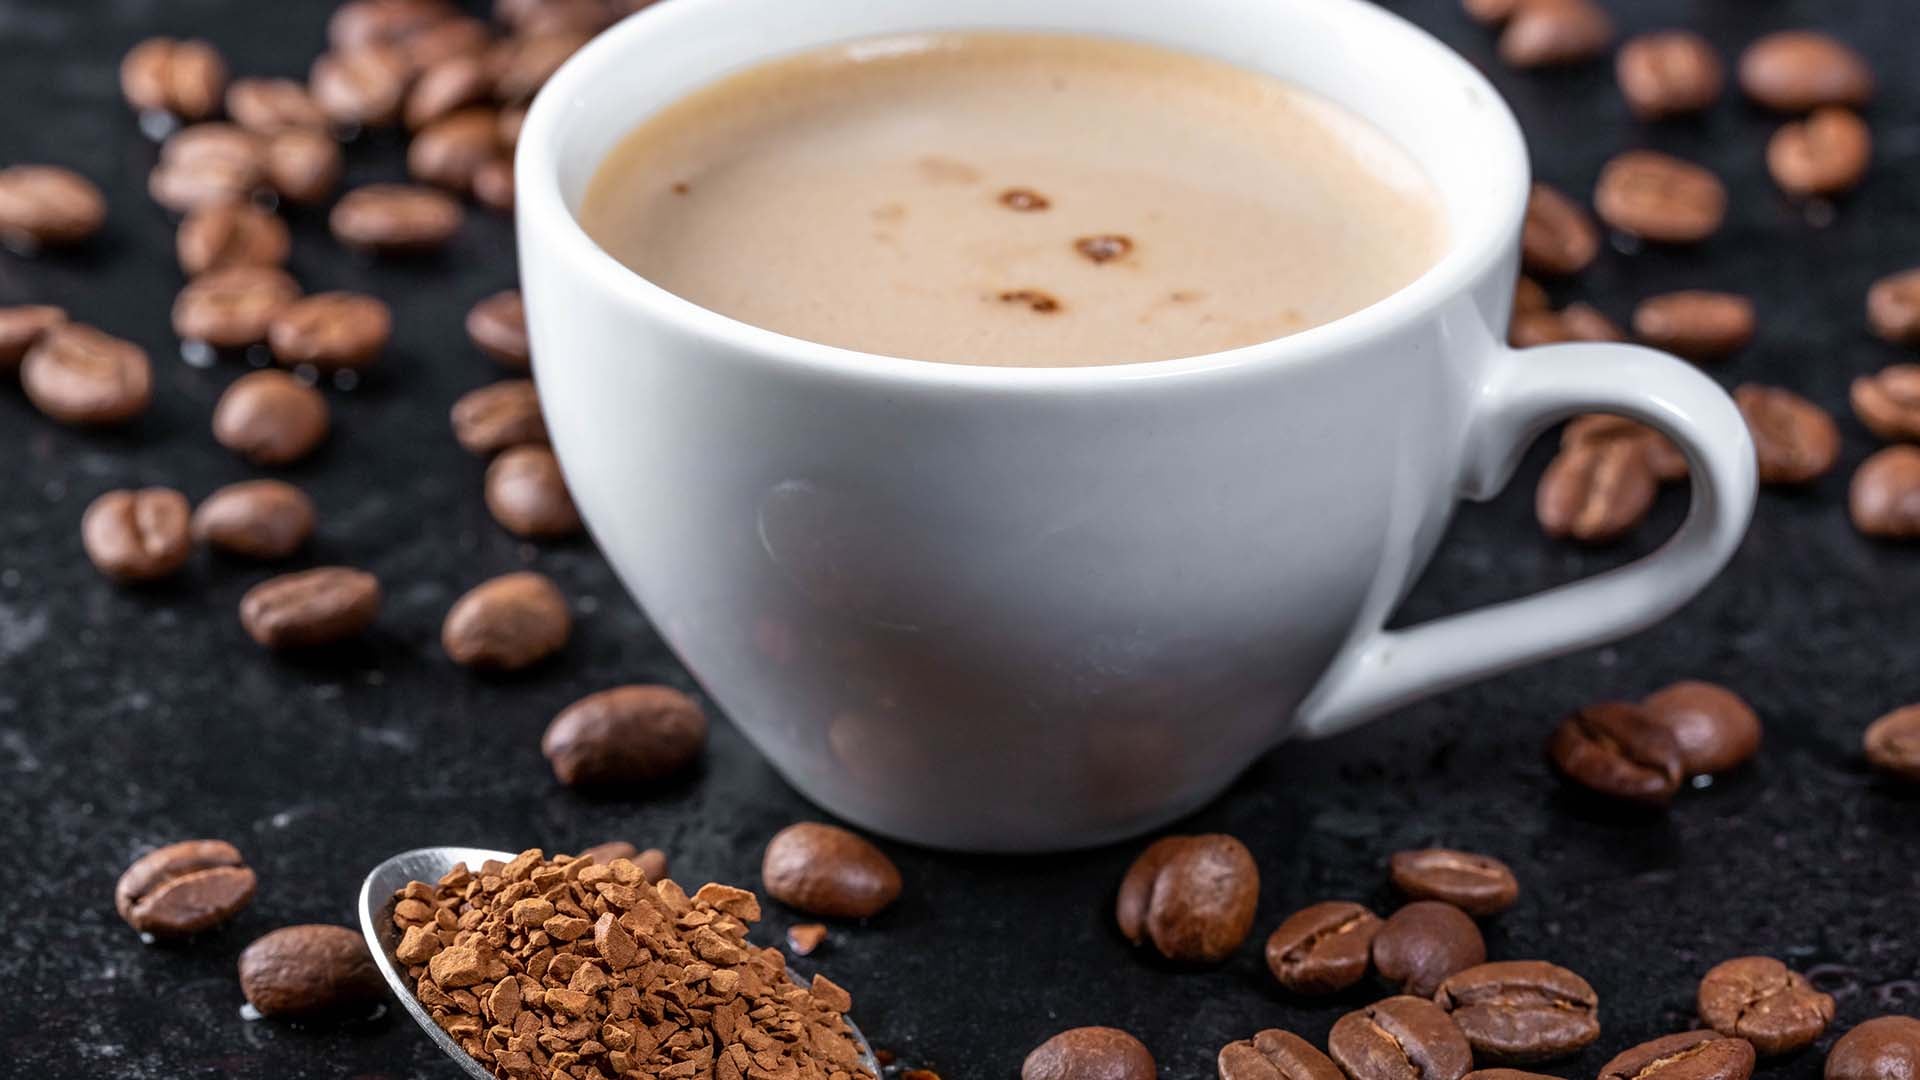 image of roasted coffee beans, ground coffee and a cup of hot coffee